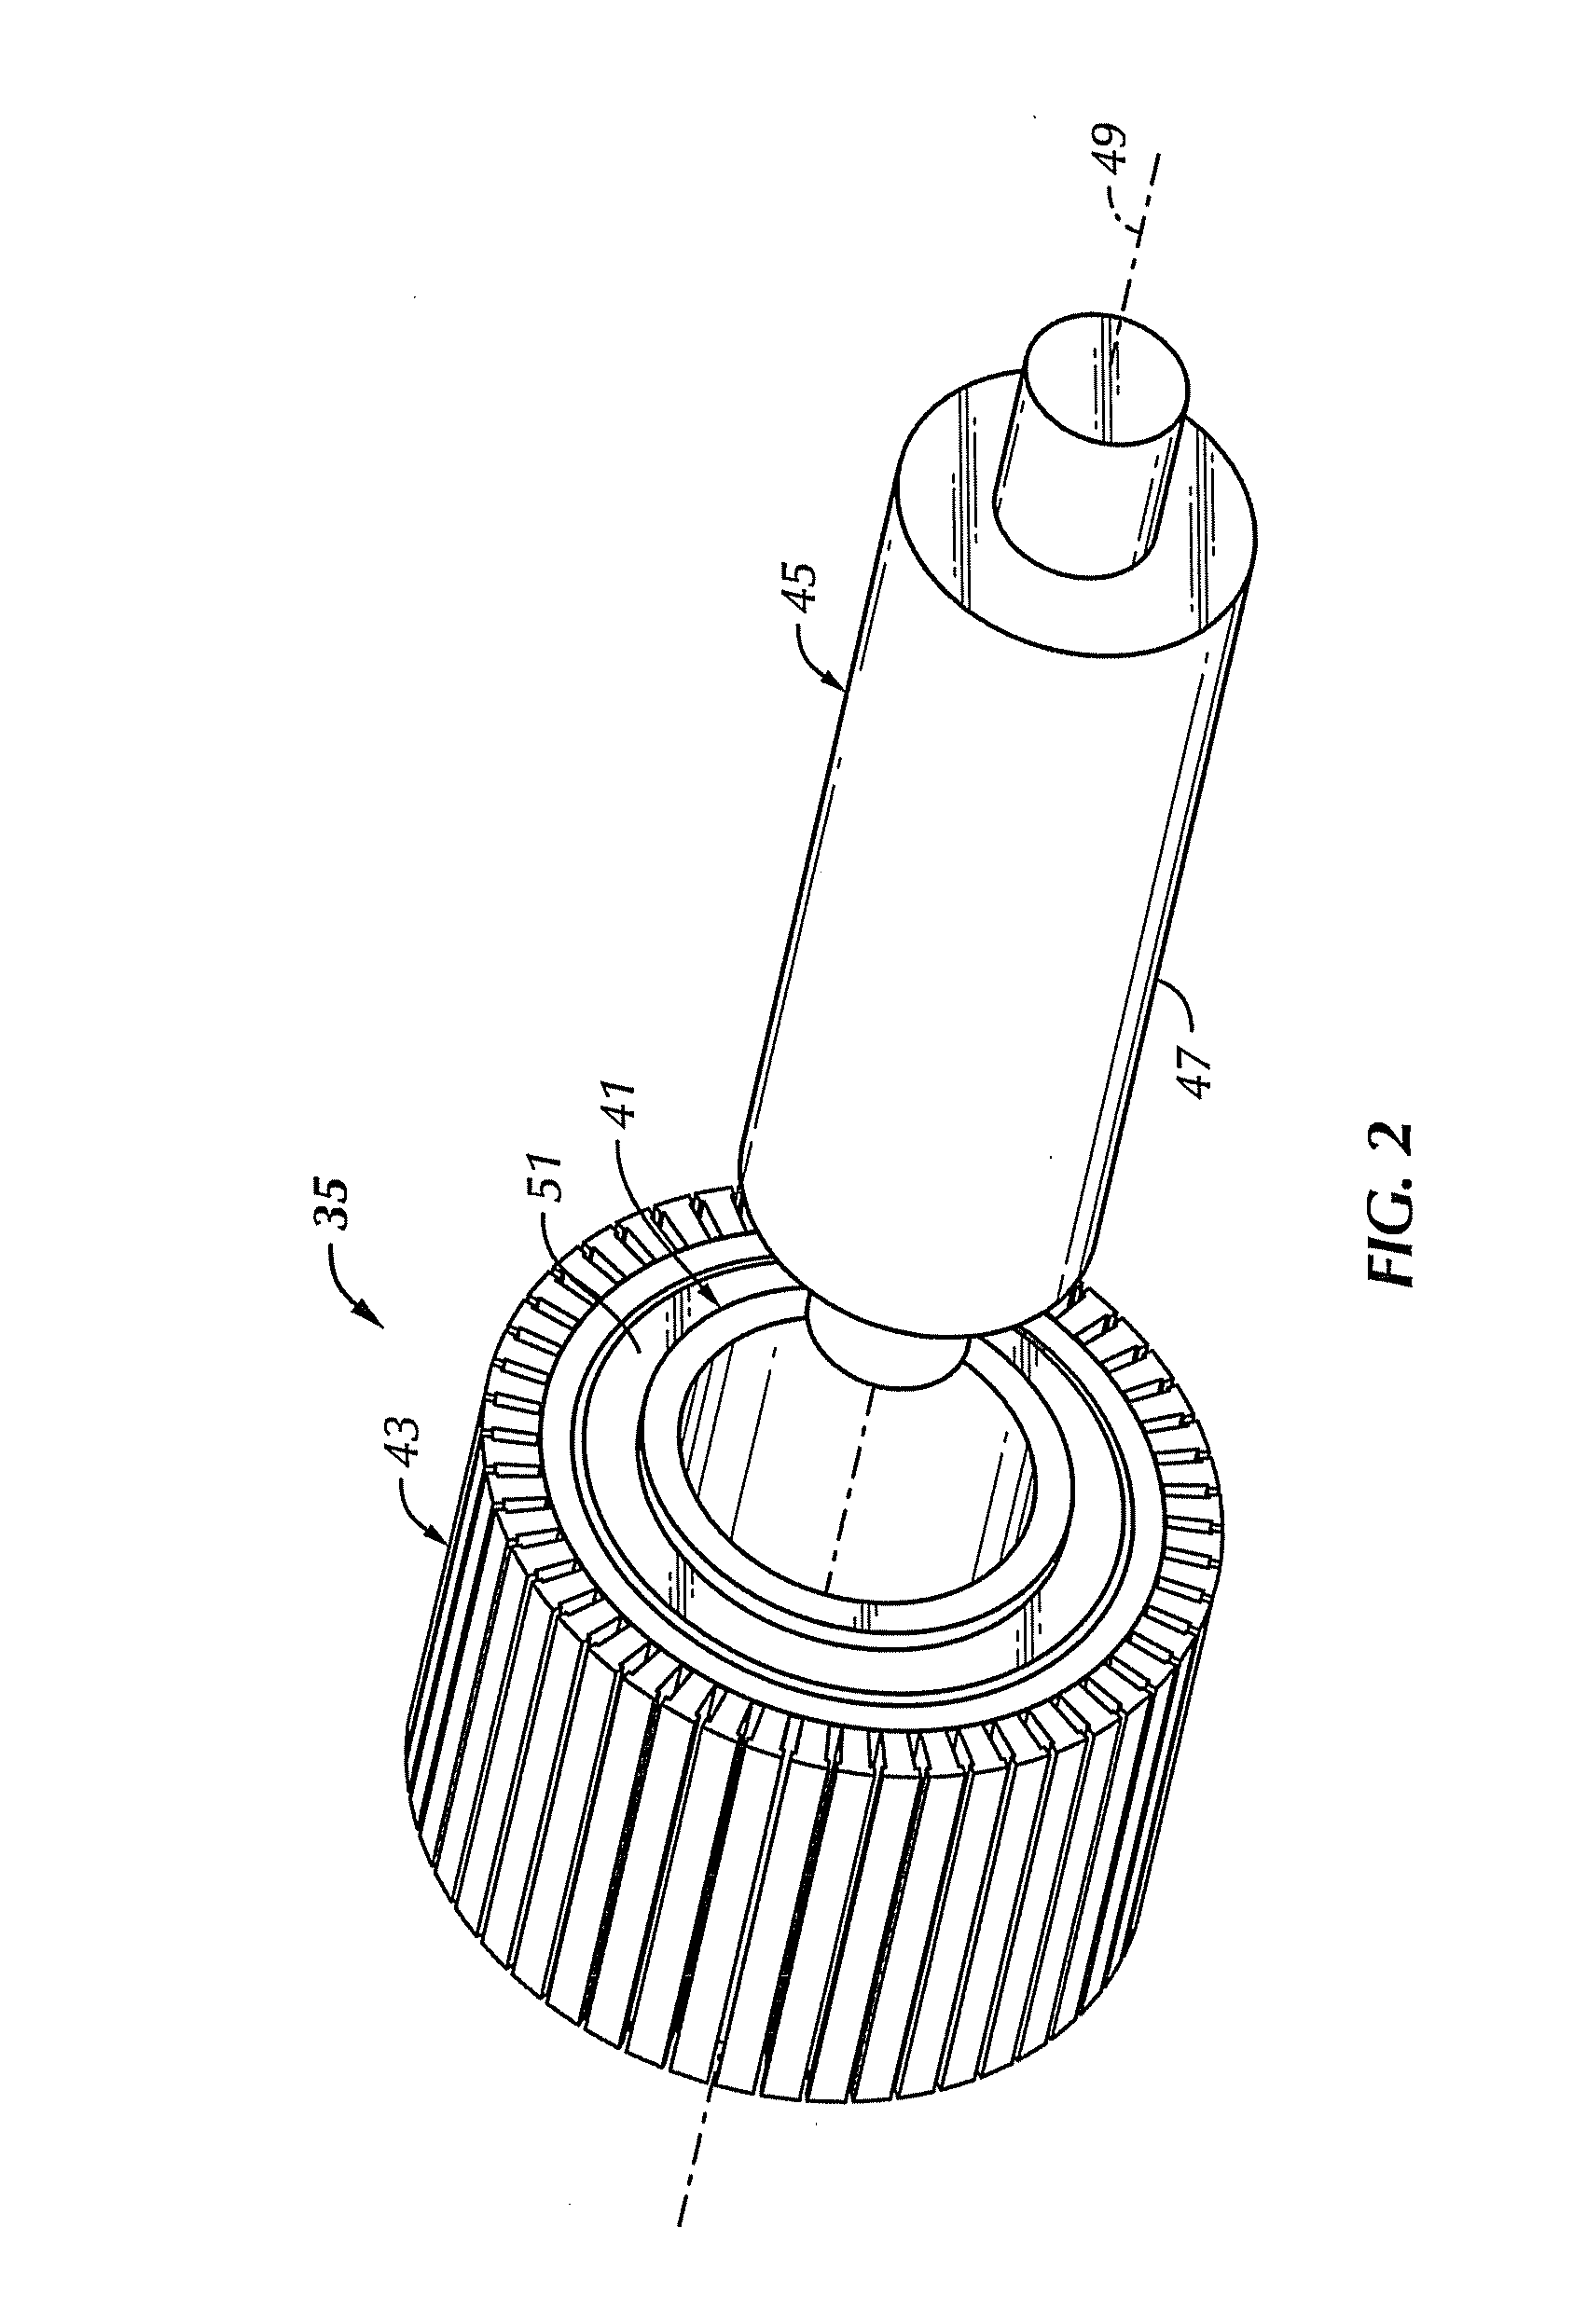 Rotor assembly and method of assembling a rotor of a high speed electric machine